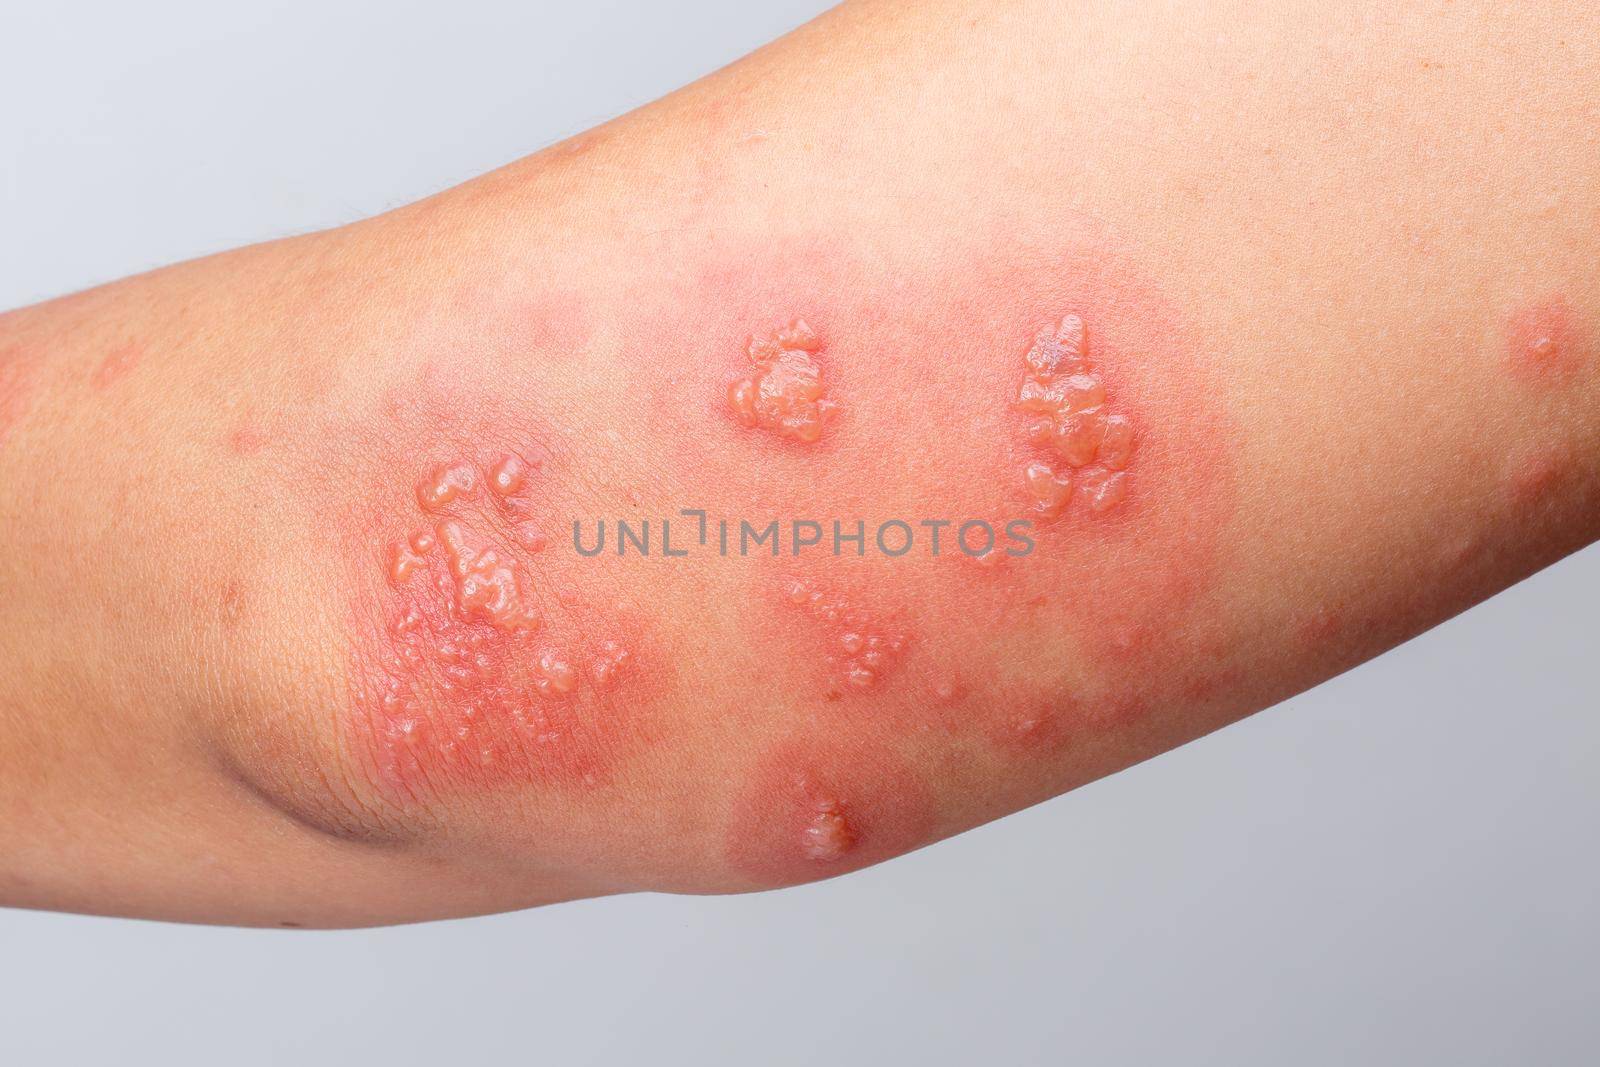 Shingles, Zoster or Herpes Zoster symptoms on arm by toa55